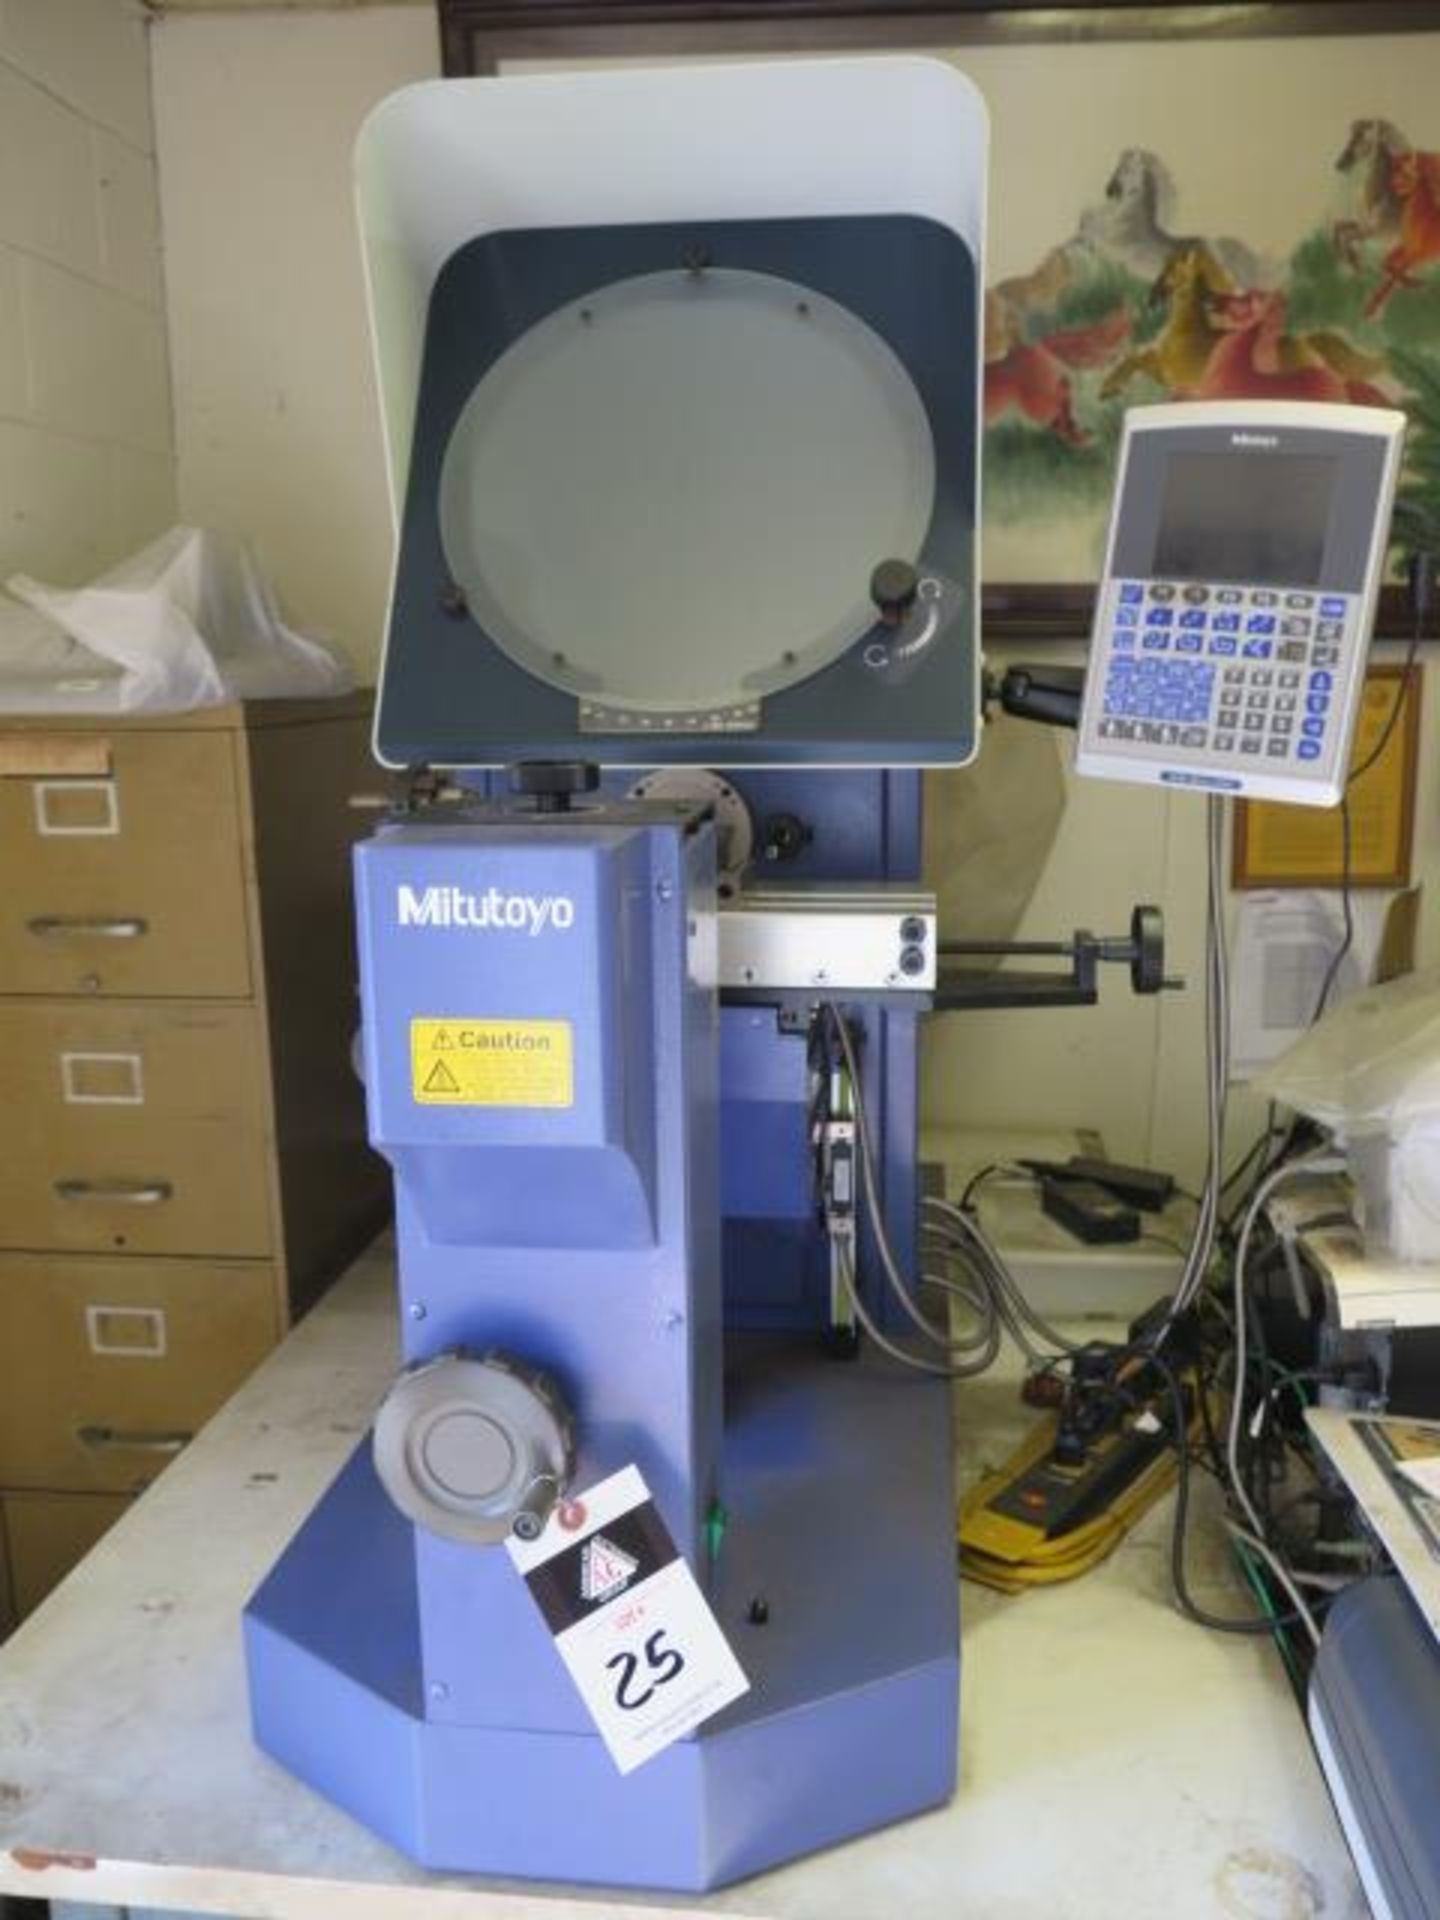 Mitutoyo PH-A14 14" Optical Comparator s/n 903037 w/Mitutoyo QM-Data 200 Prog DRO, SOLD AS IS